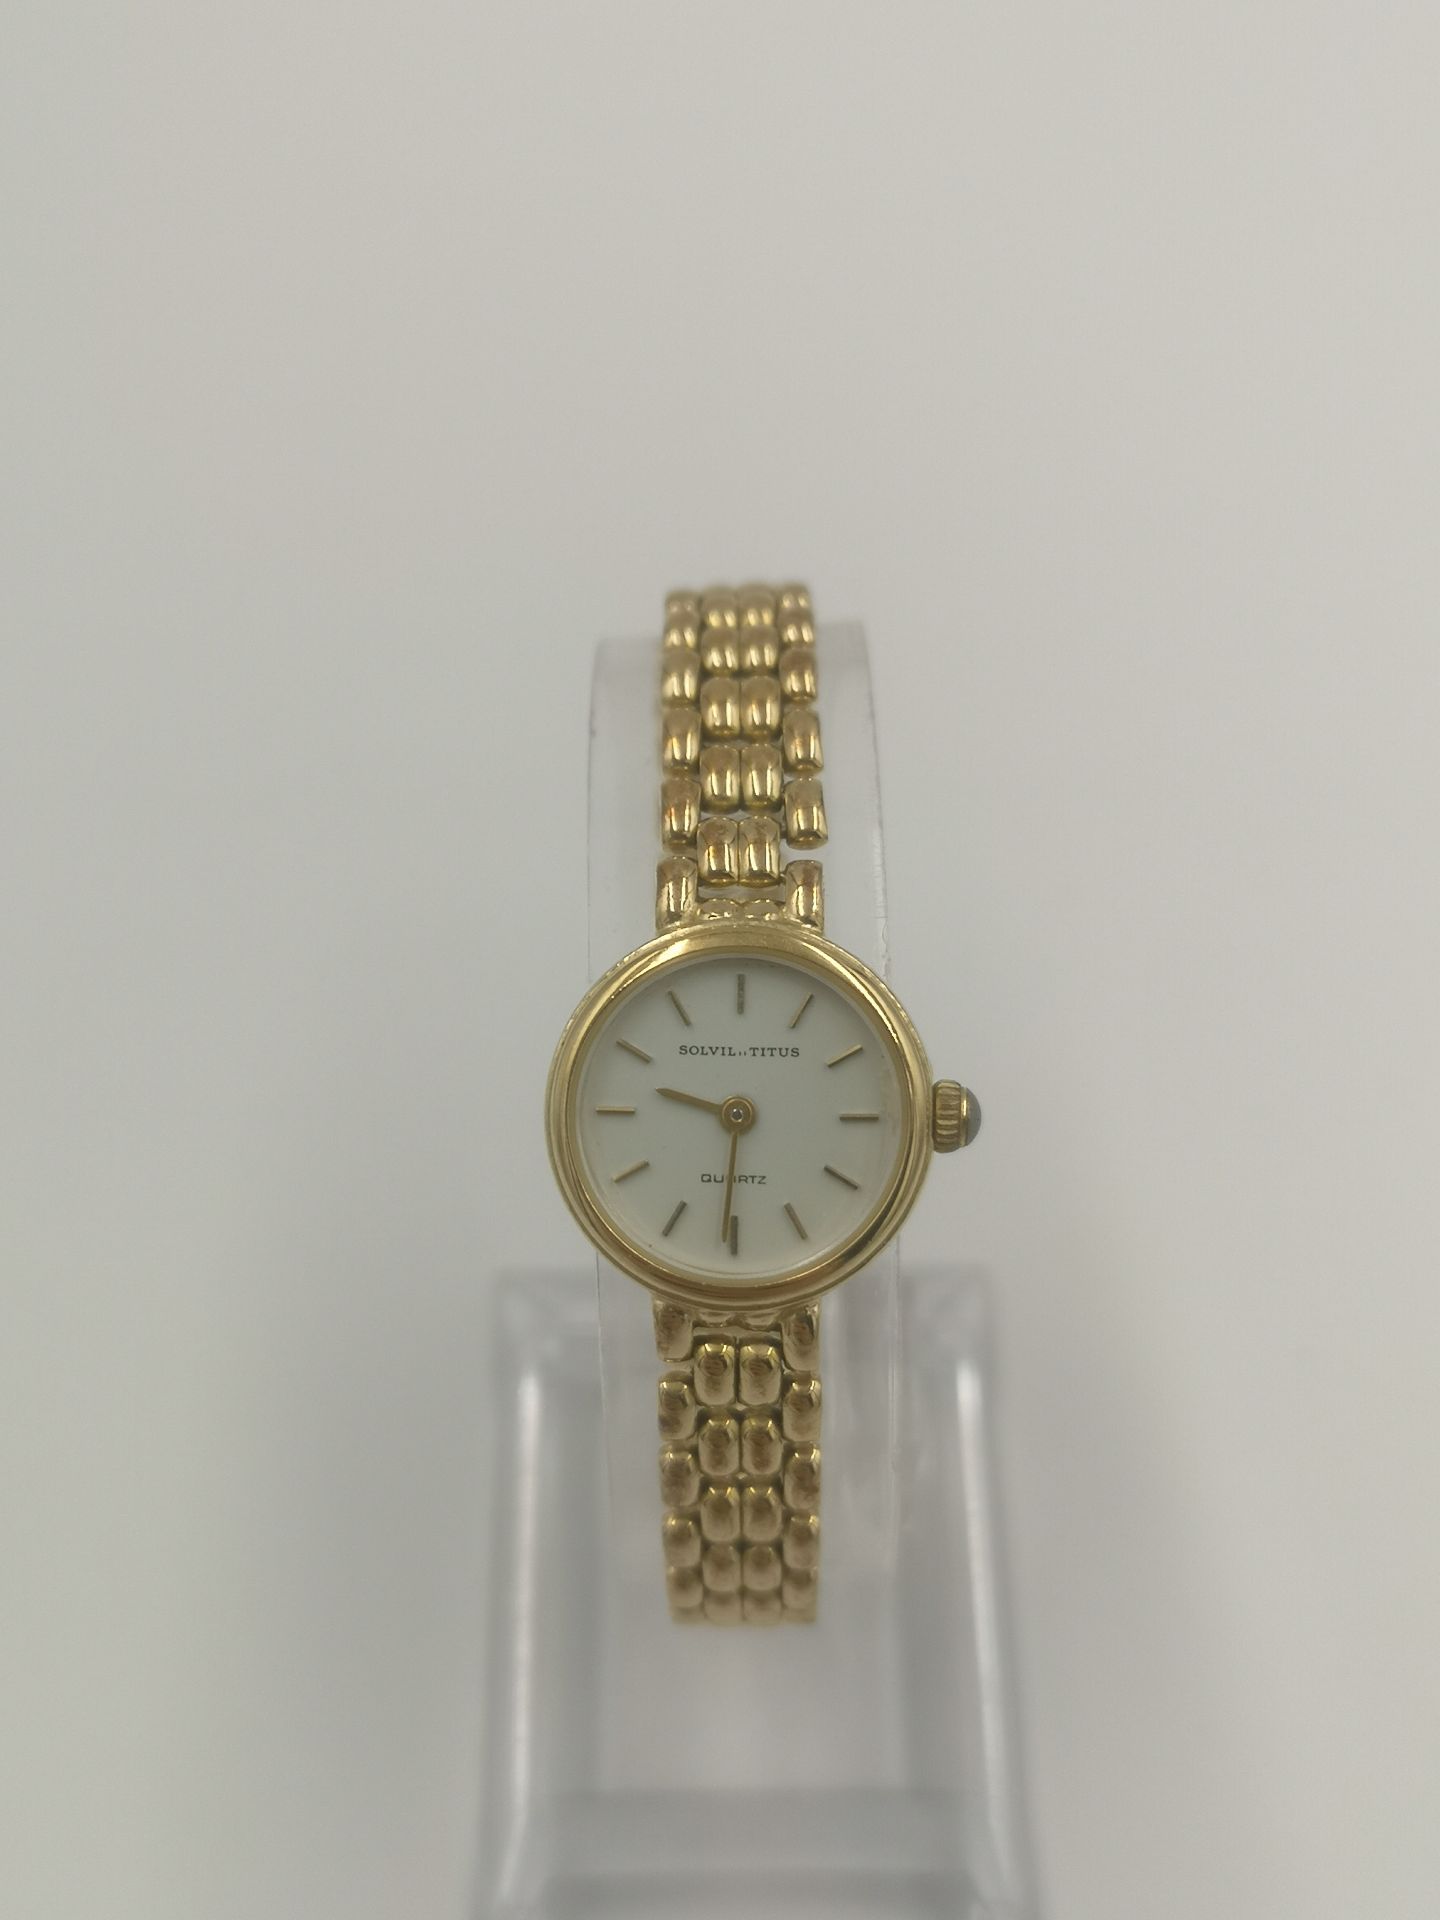 Solvil et Titus lady's wrist watch with case marked 375.